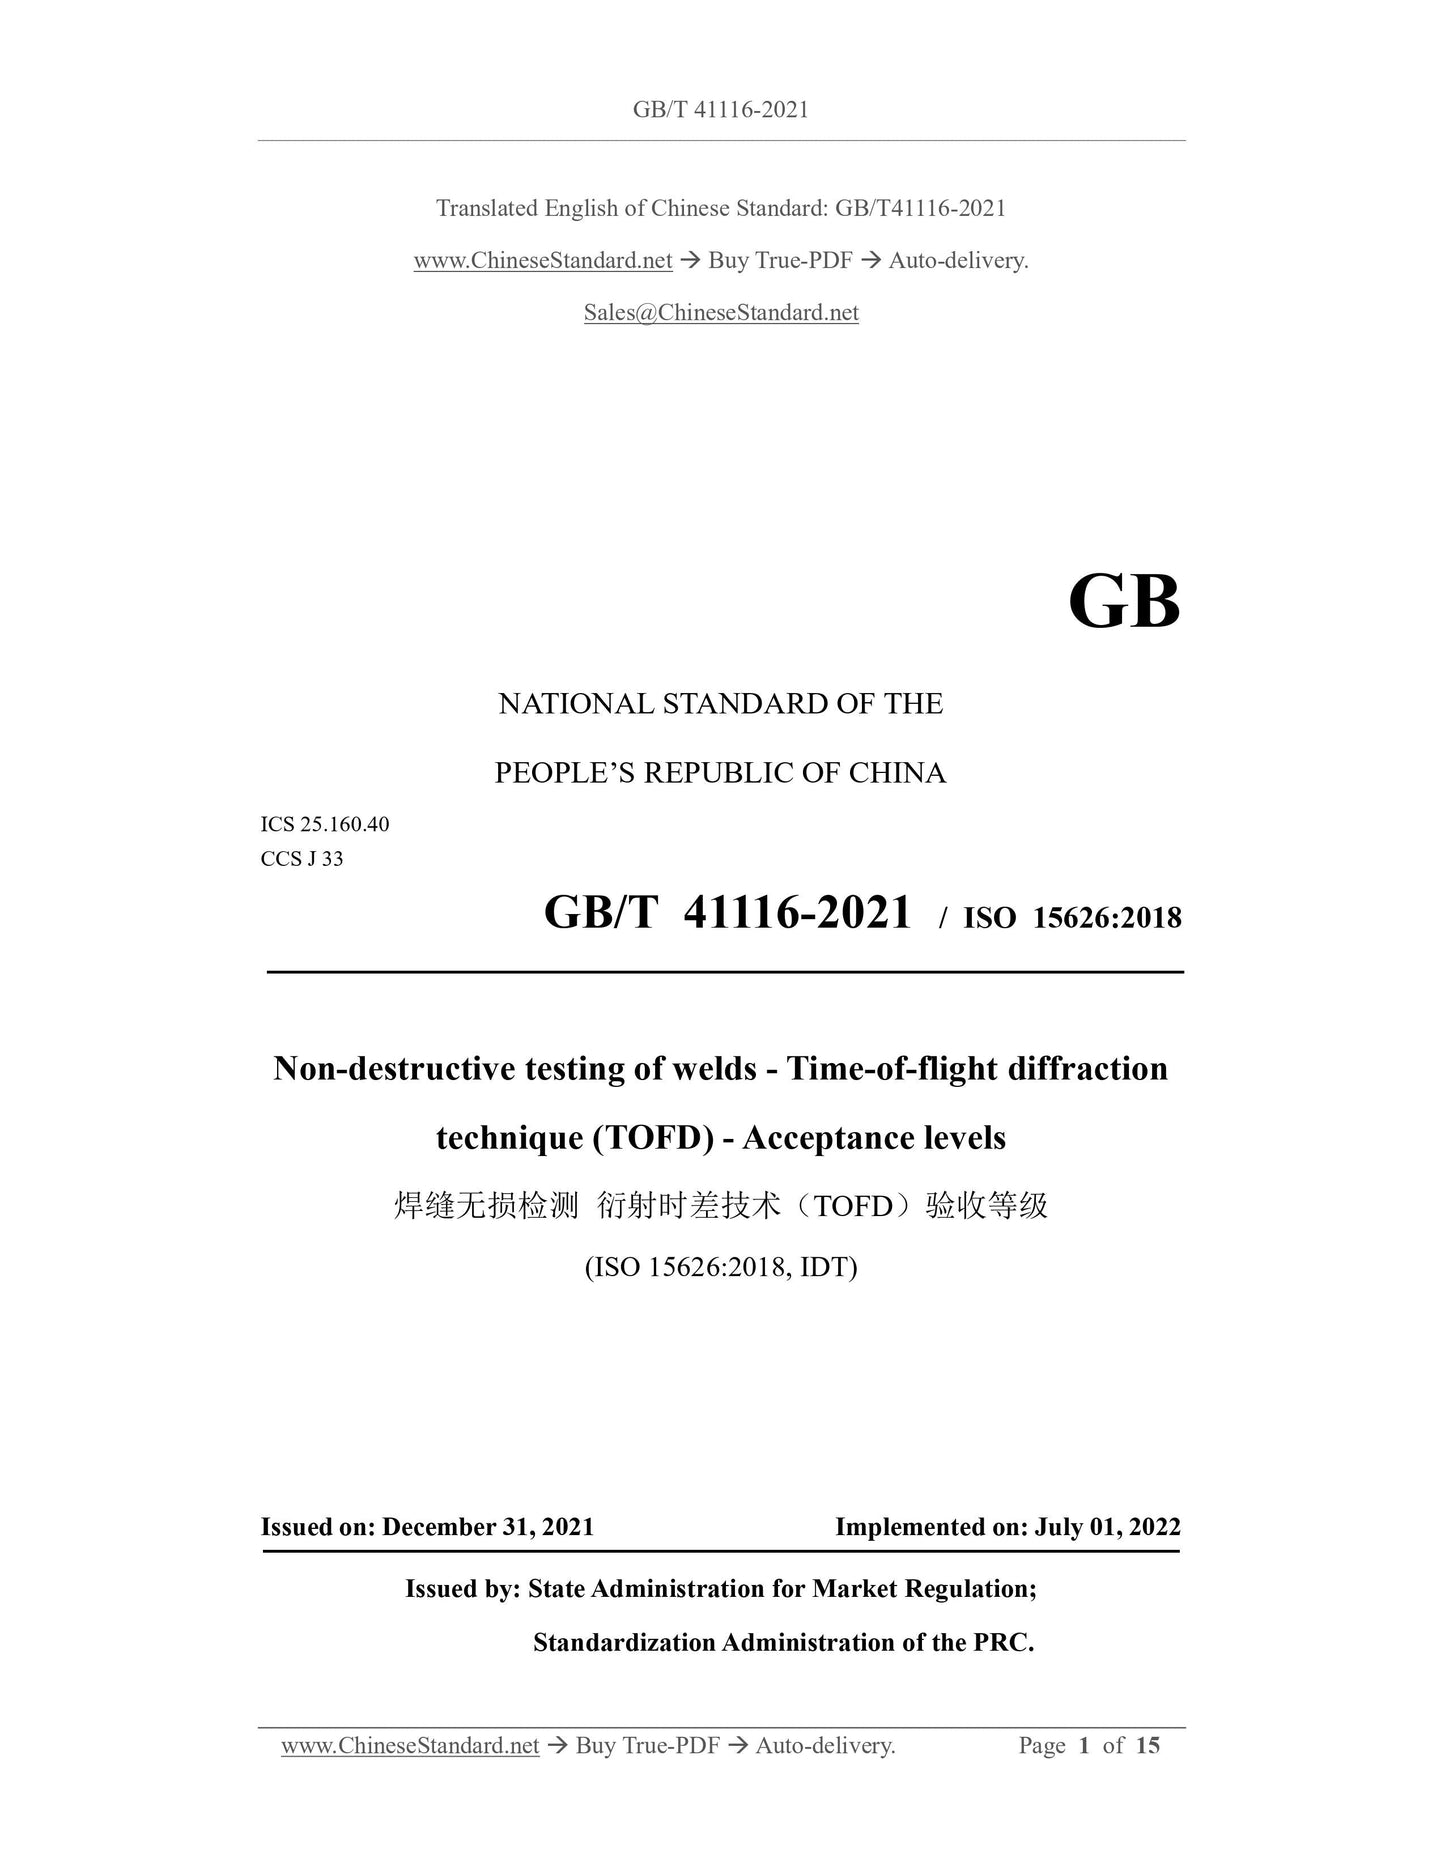 GB/T 41116-2021 Page 1